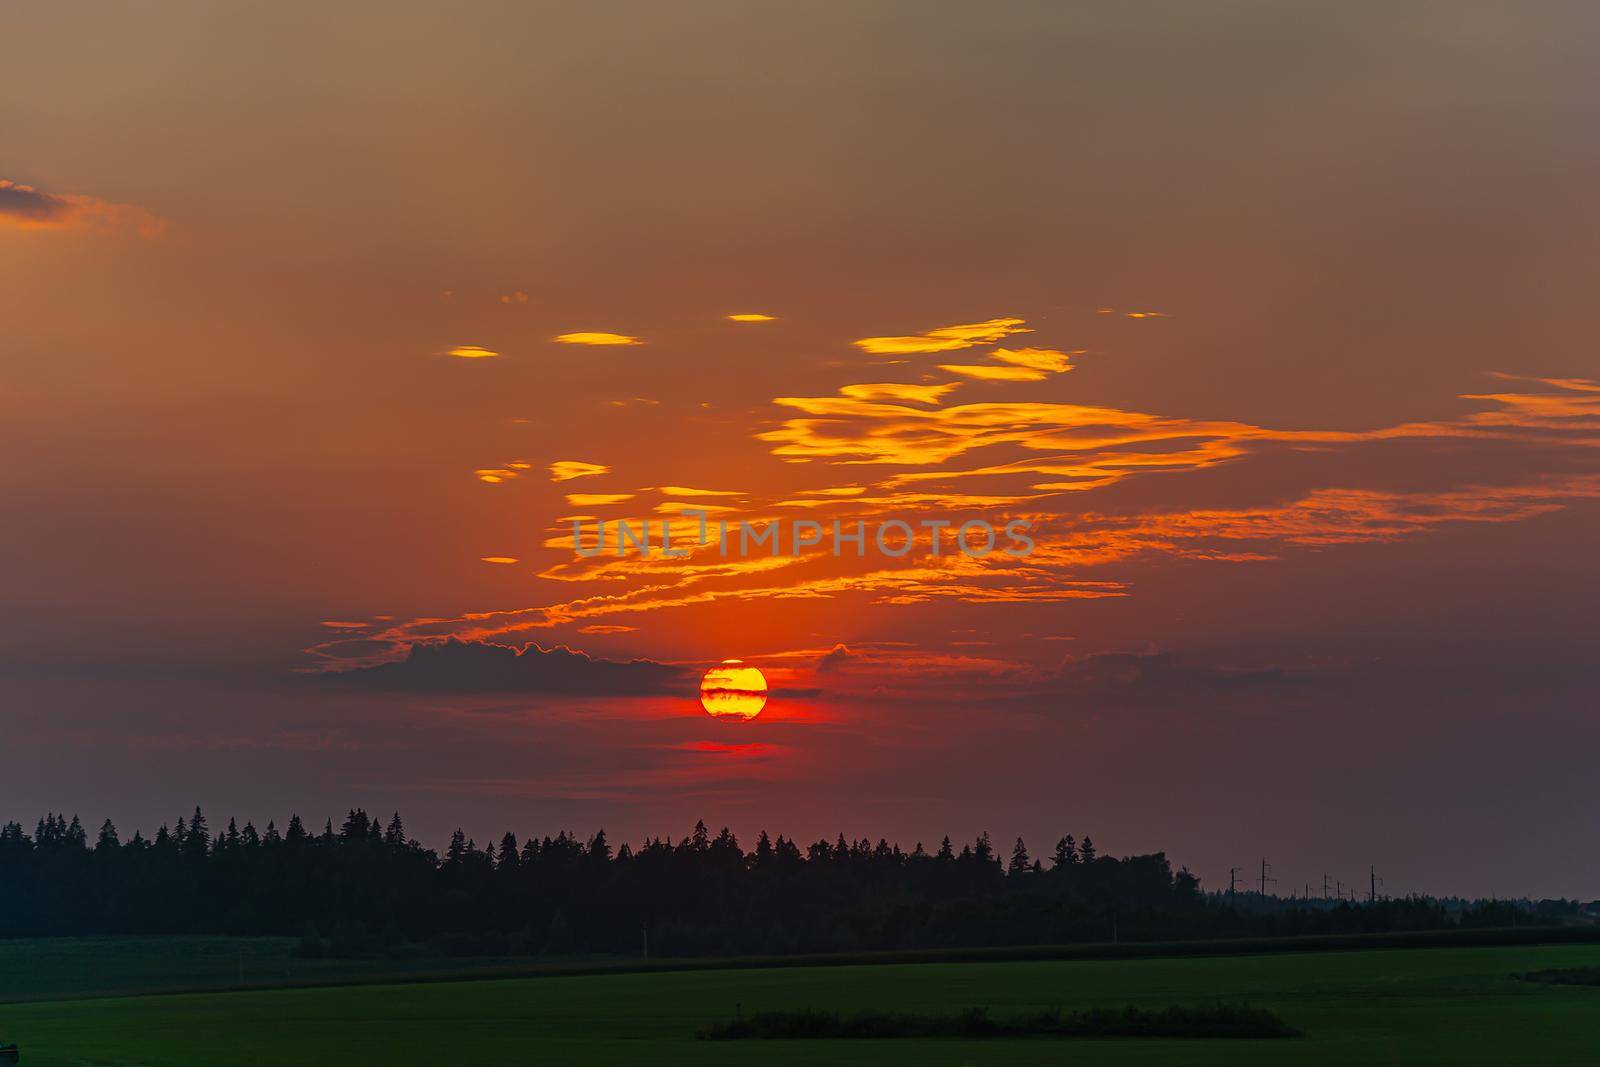 Sunset. The sun sets behind clouds against a background of green forest and fields. by Grommik